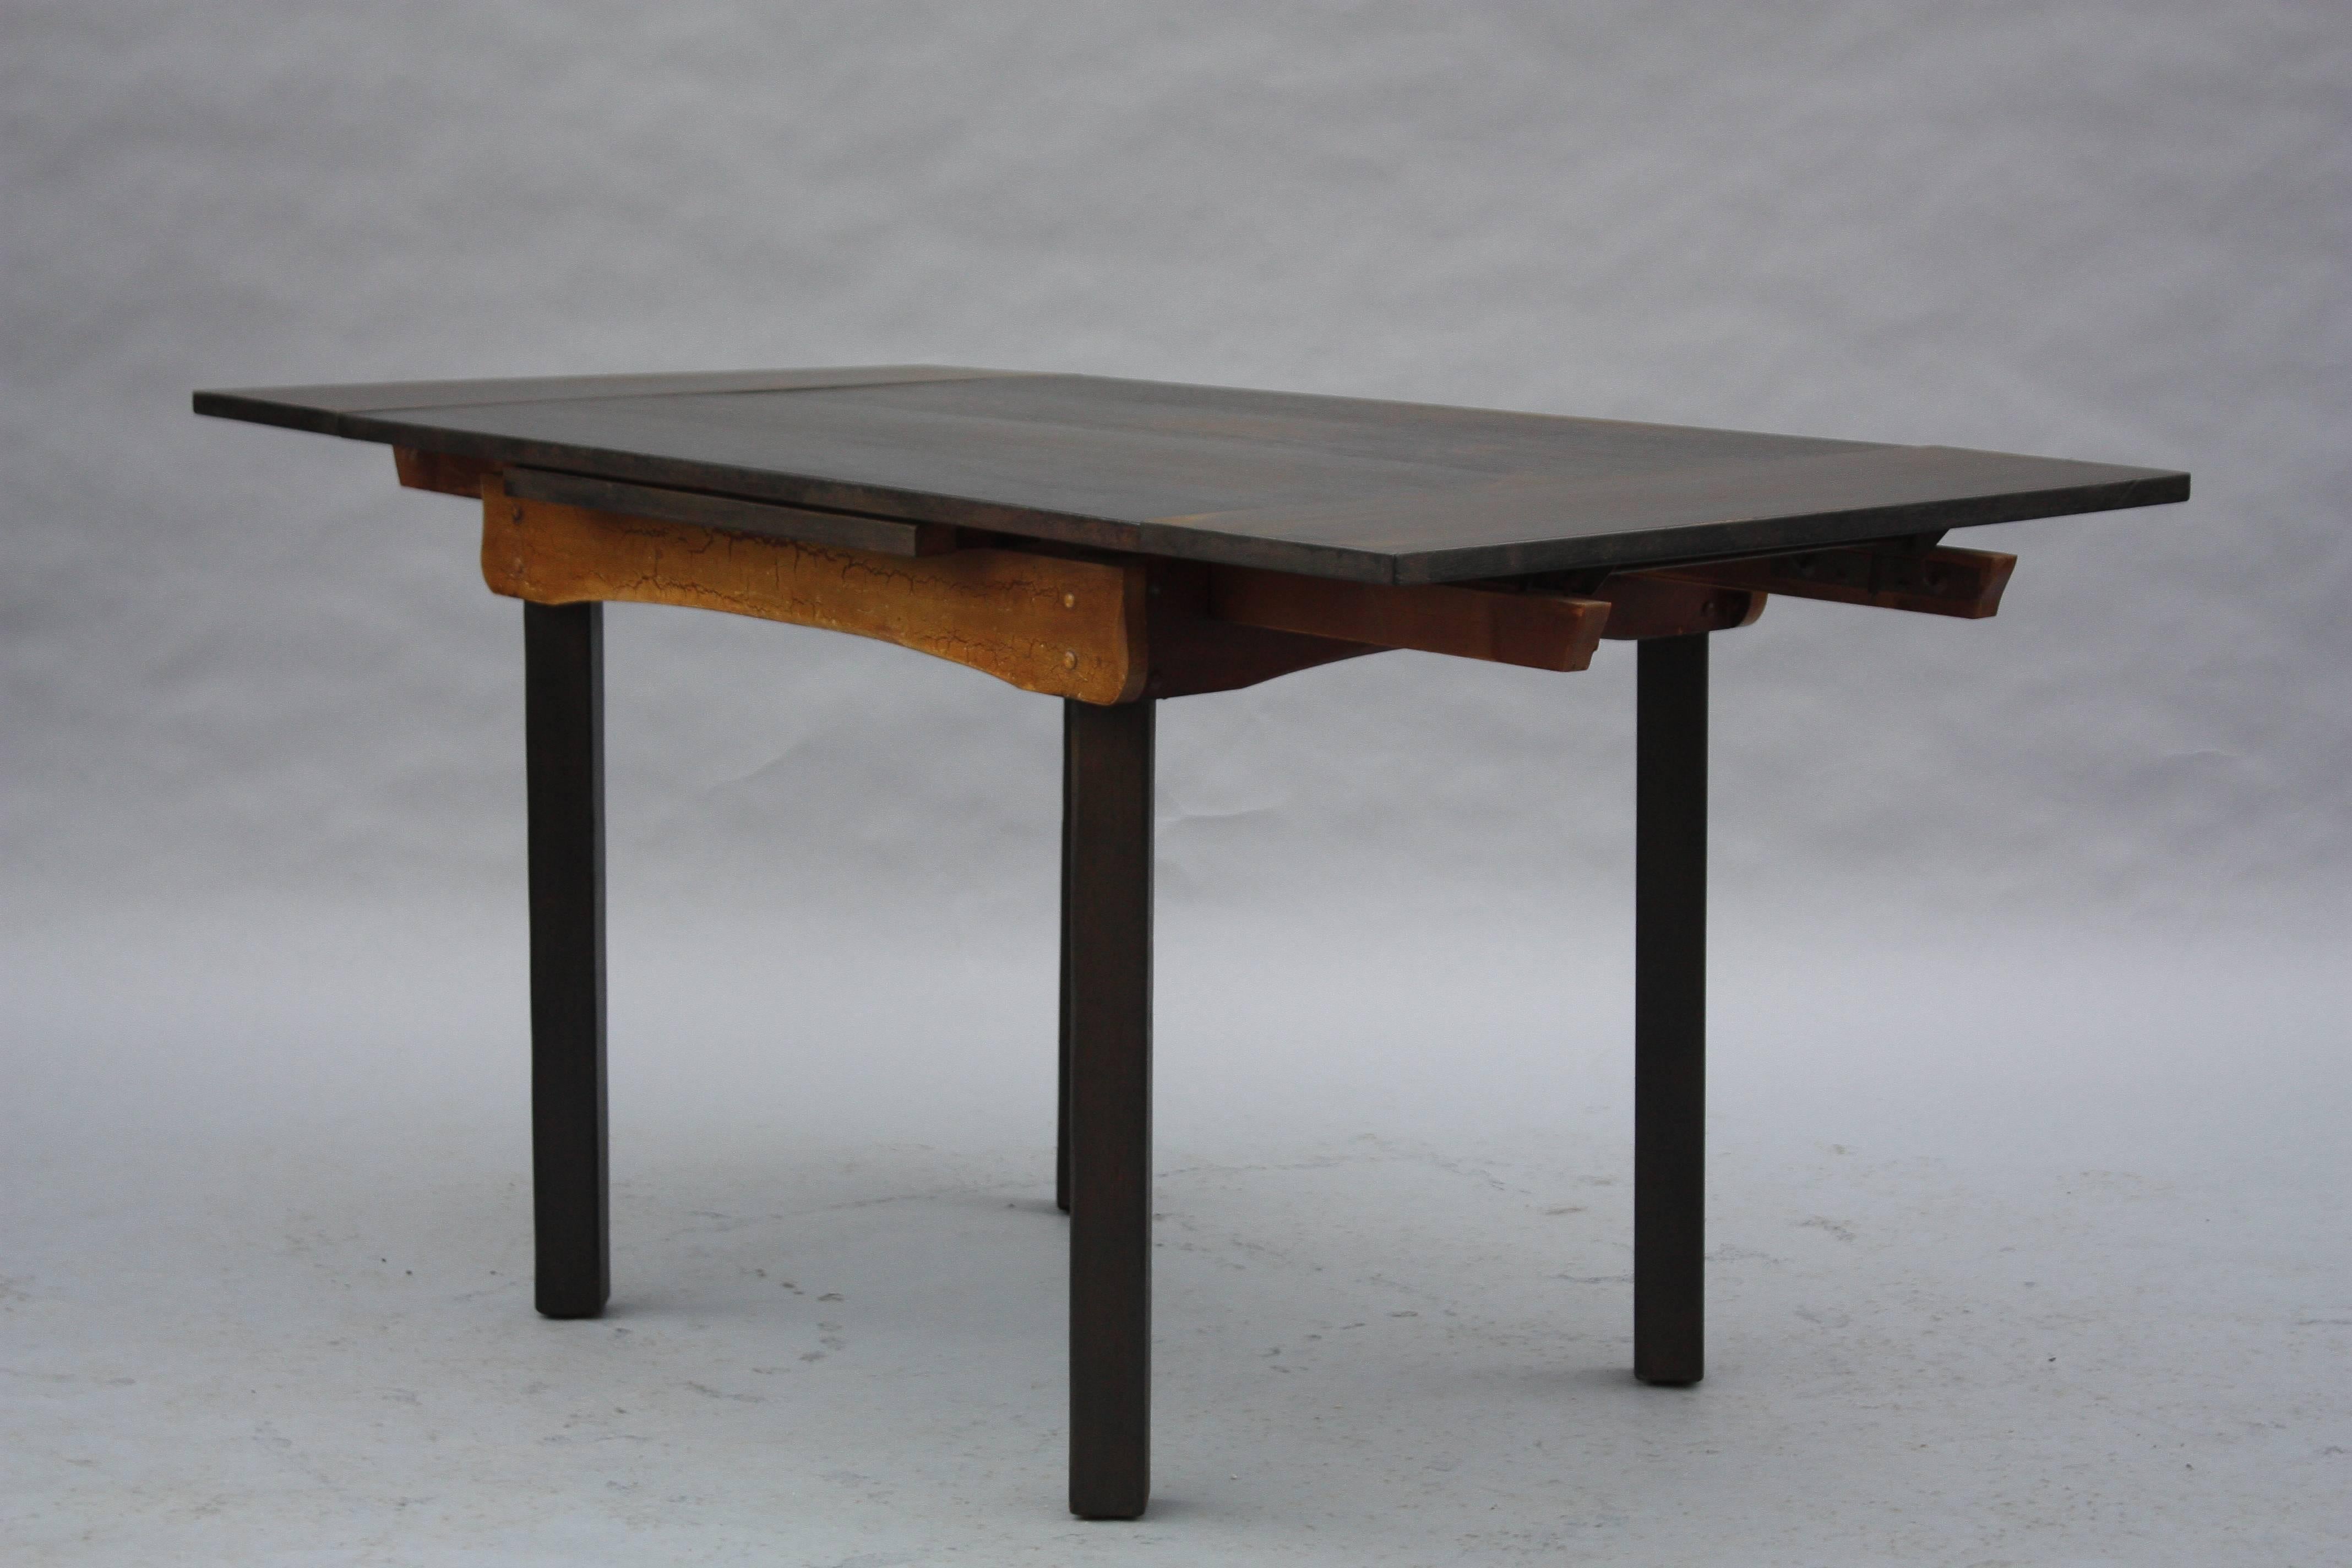 American Monterey Period Dining Room Table with Expandable Leaves